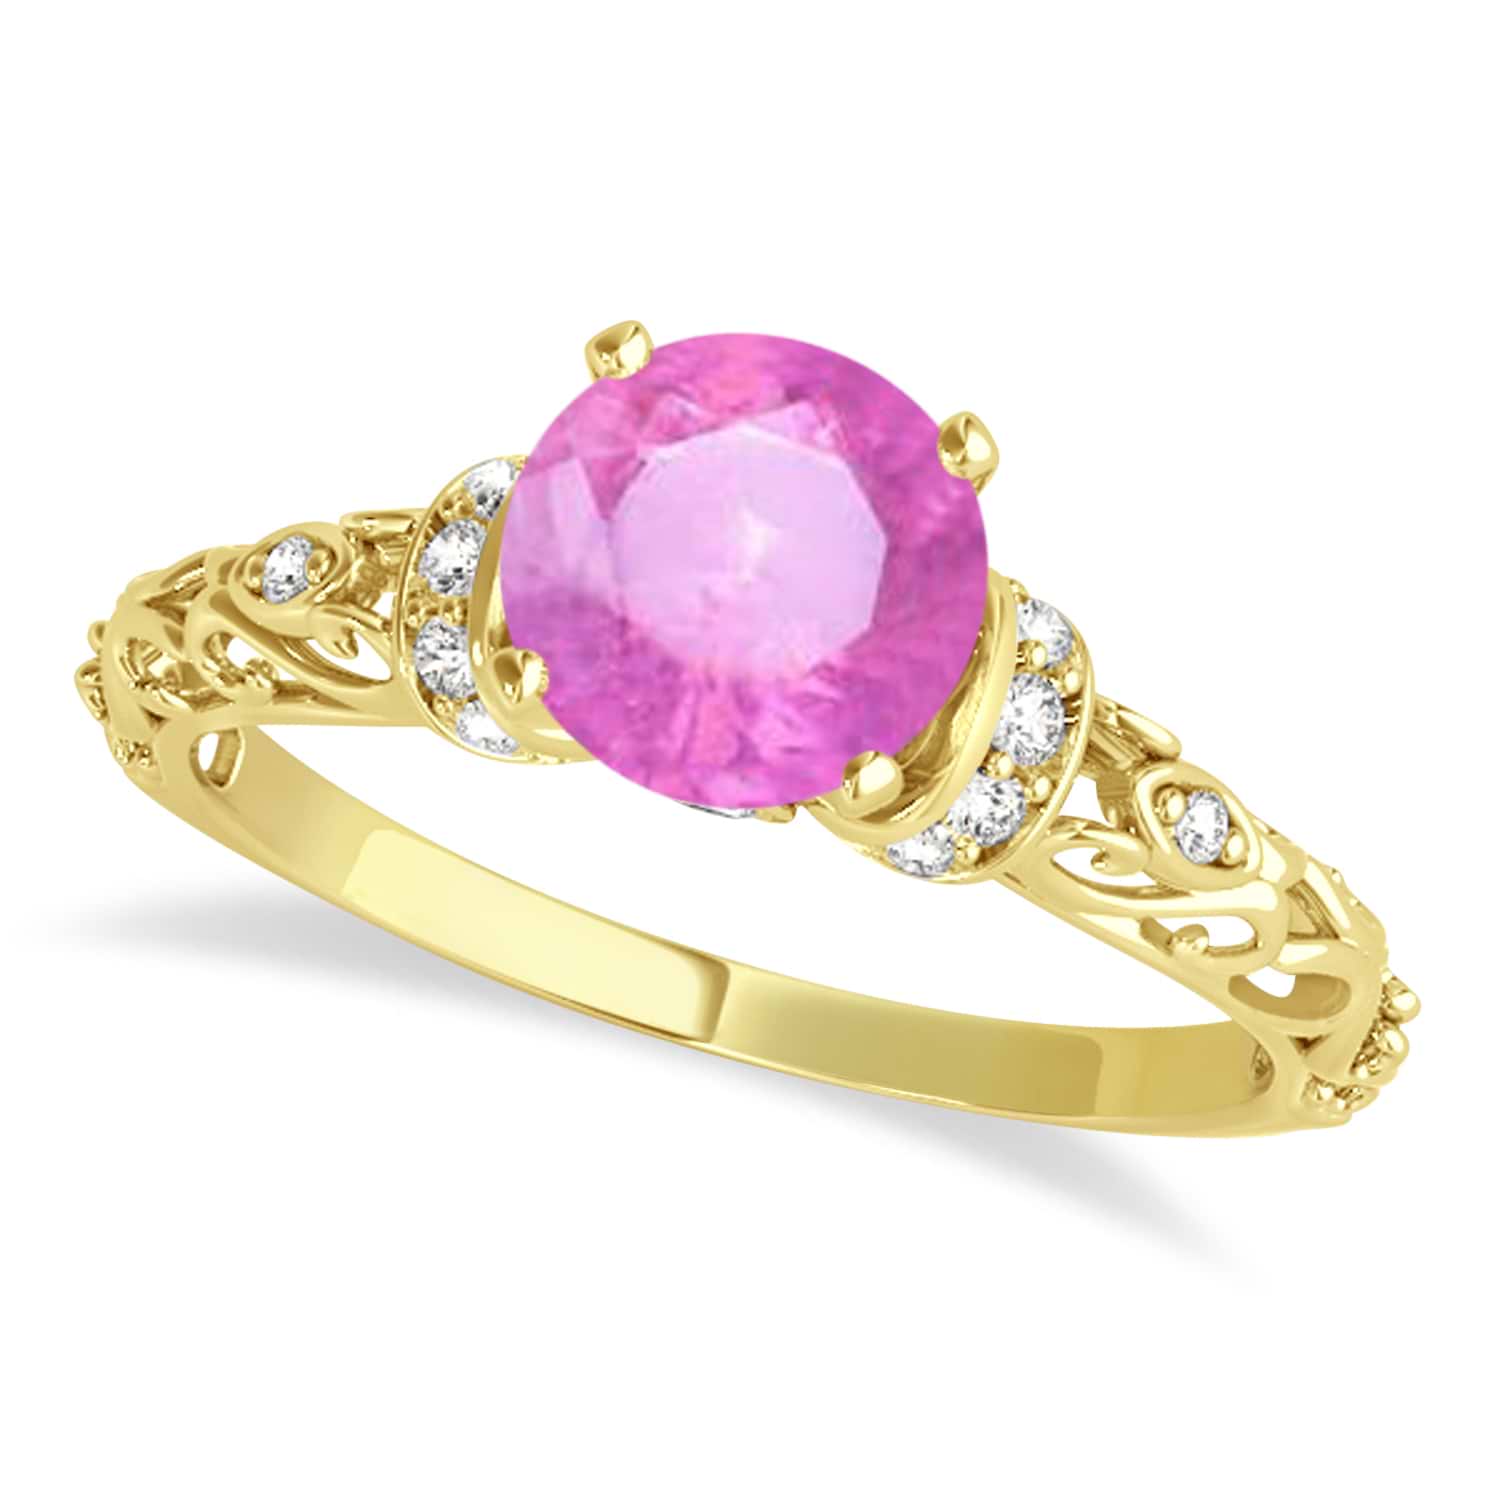 Pink Sapphire & Diamond Antique Engagement Ring 14k Yellow Gold 0.87ct